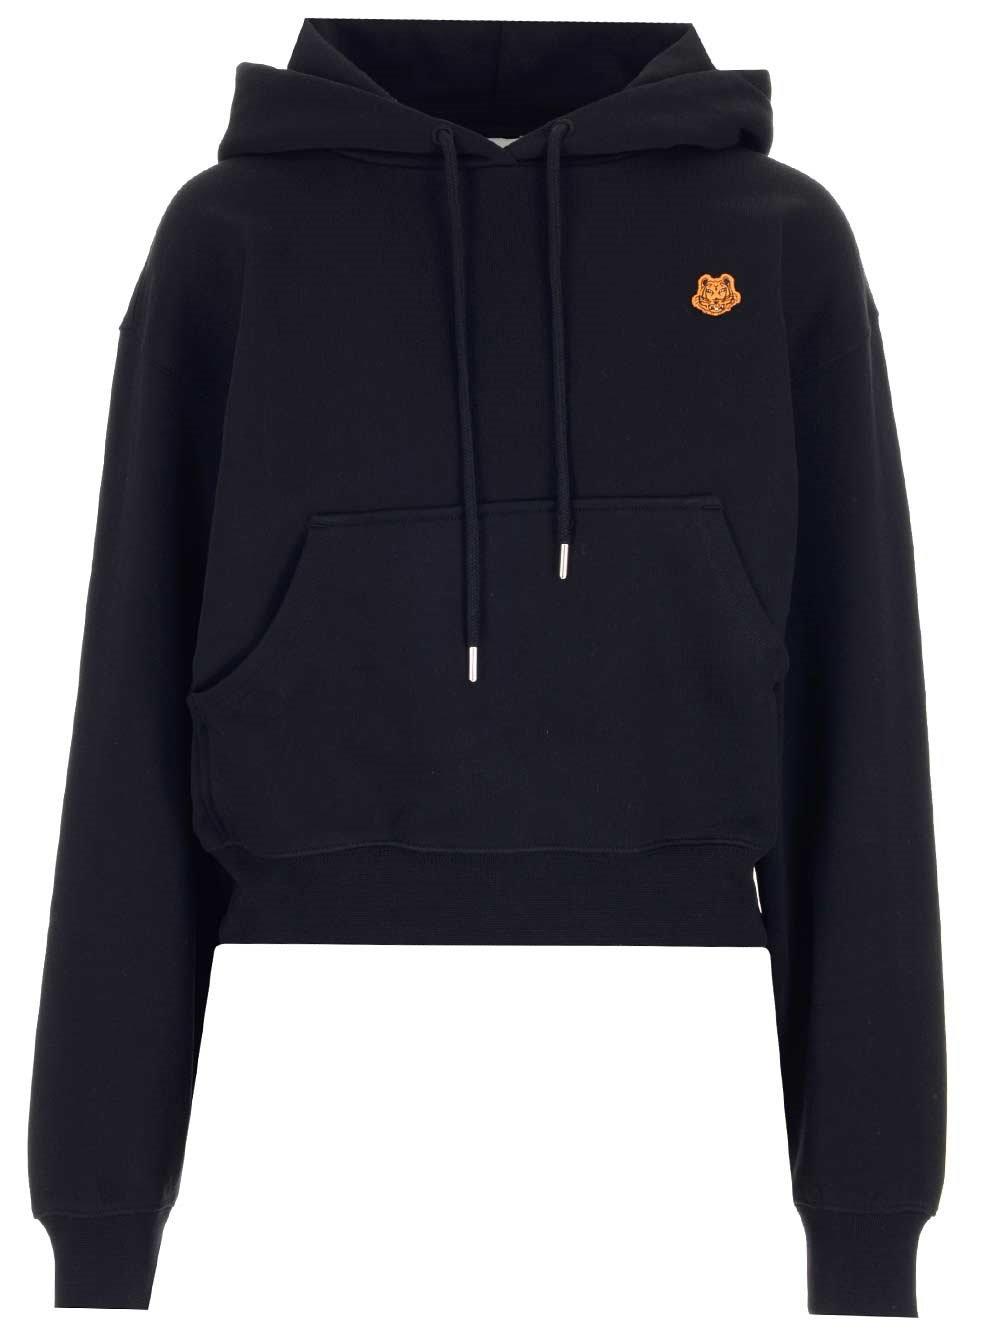 Tiger Crest Embroidered Hoodie